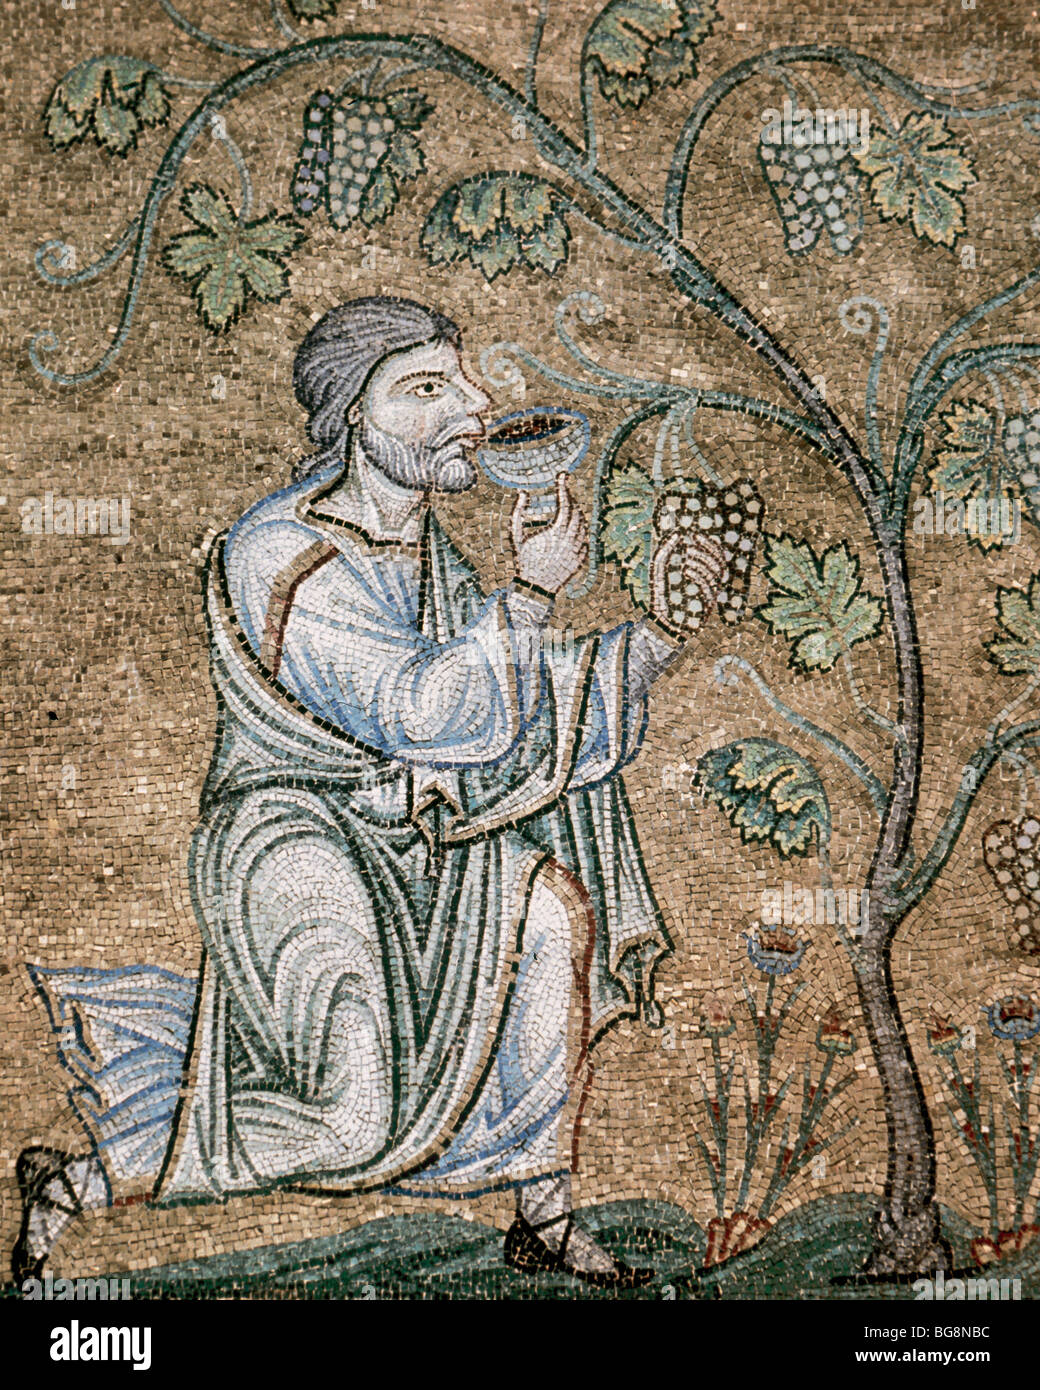 Noah drinking wine. Mosaic in the Baptistery of St. Mark's Basilica, dating between XII-XIV centuries. Venice. Italy. Stock Photo